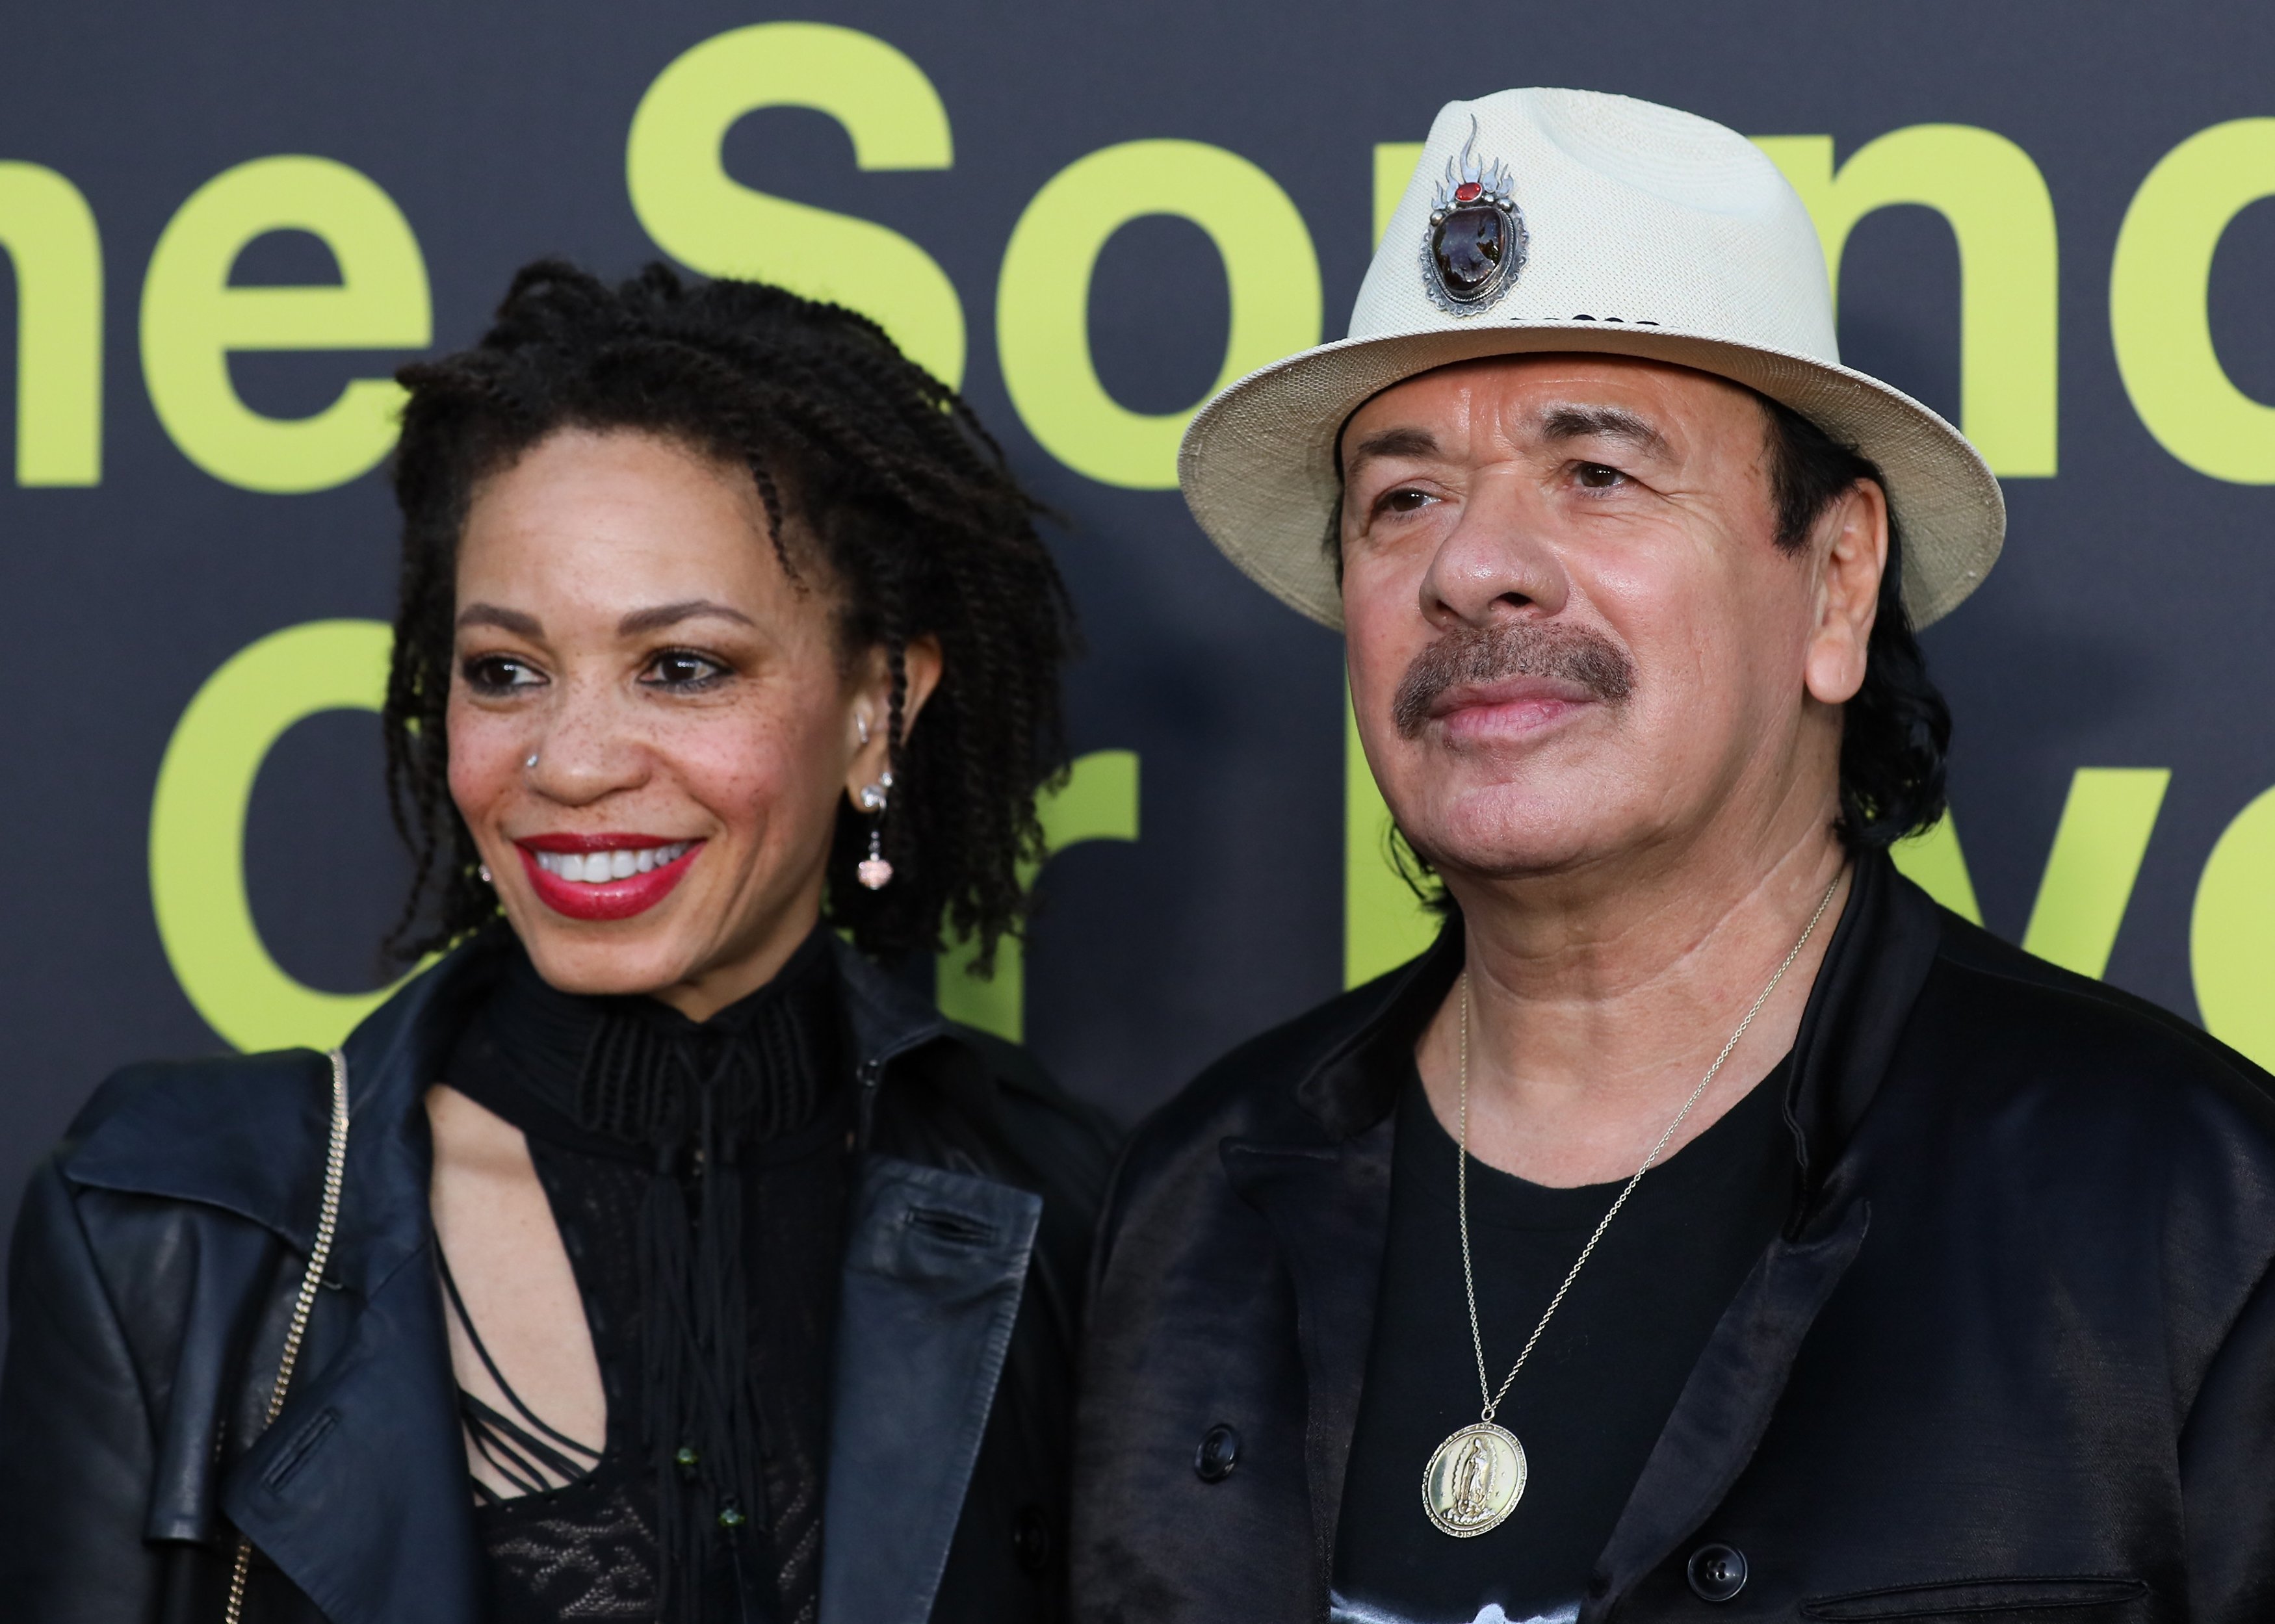 Carlos Santana and Cindy Blackman at the premiere of "Clive Davis: The Soundtrack Of Our Lives" on September 26, 2017 | Source: Getty Images